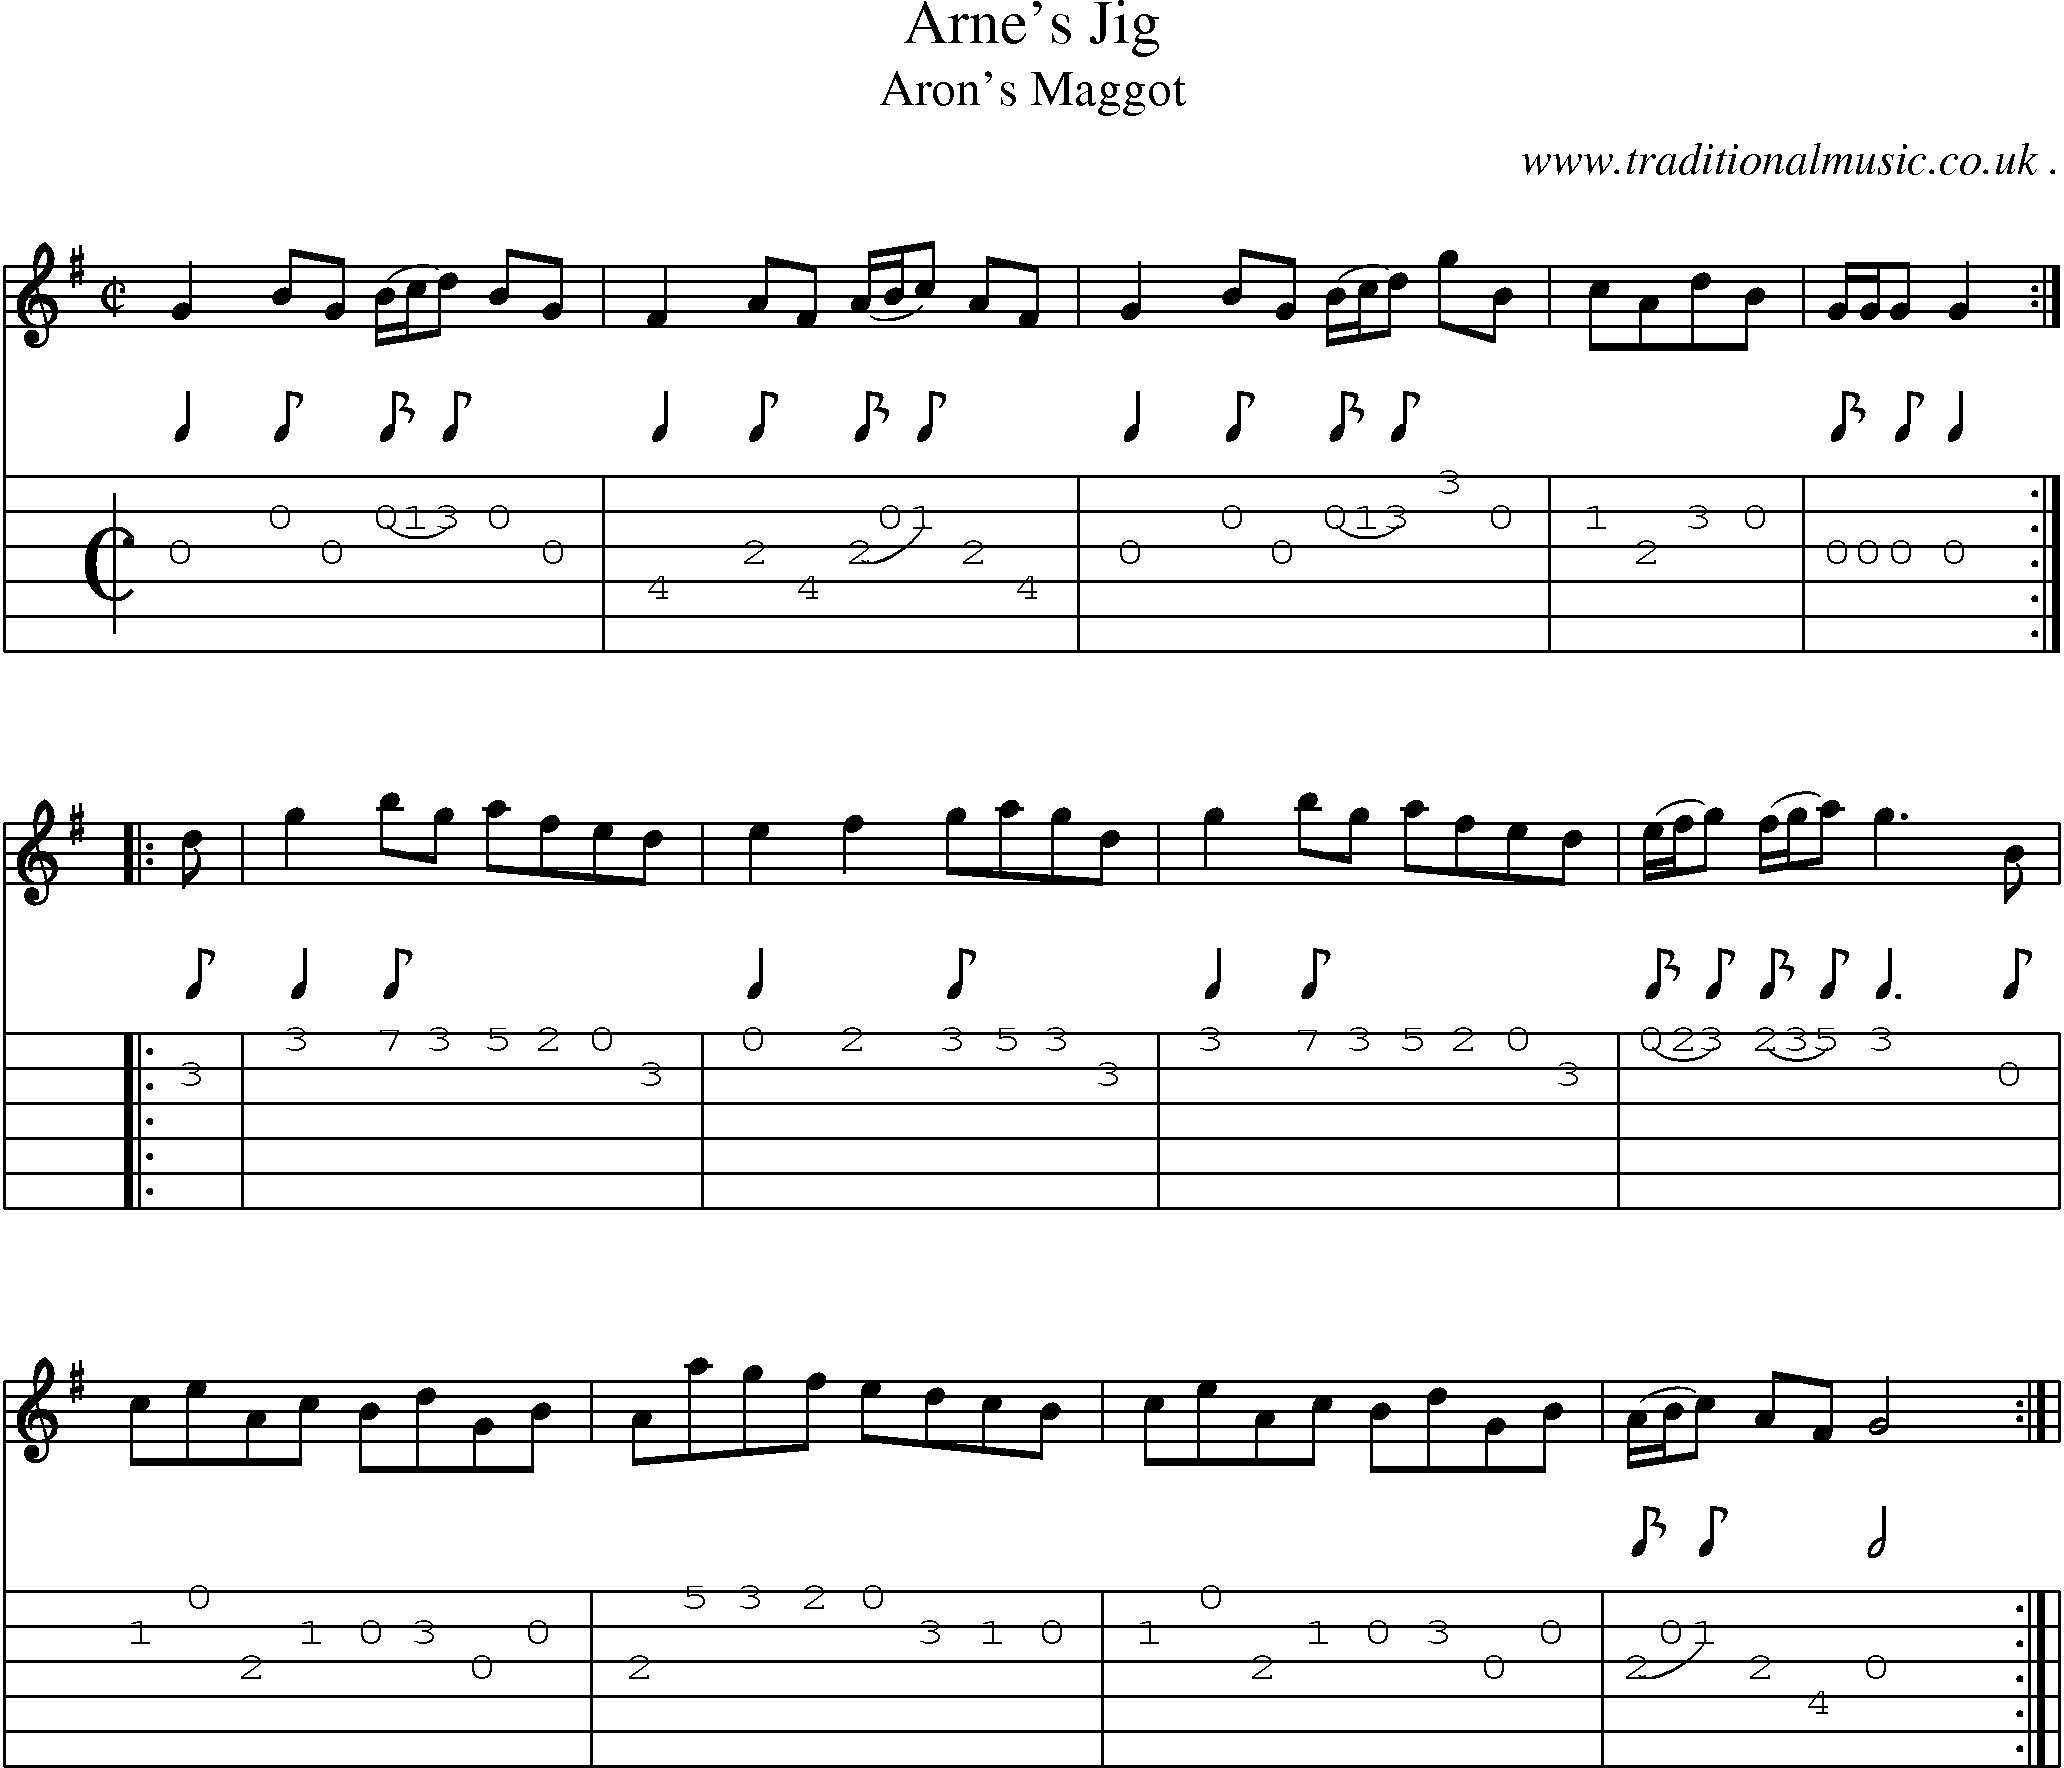 Sheet-Music and Guitar Tabs for Arnes Jig